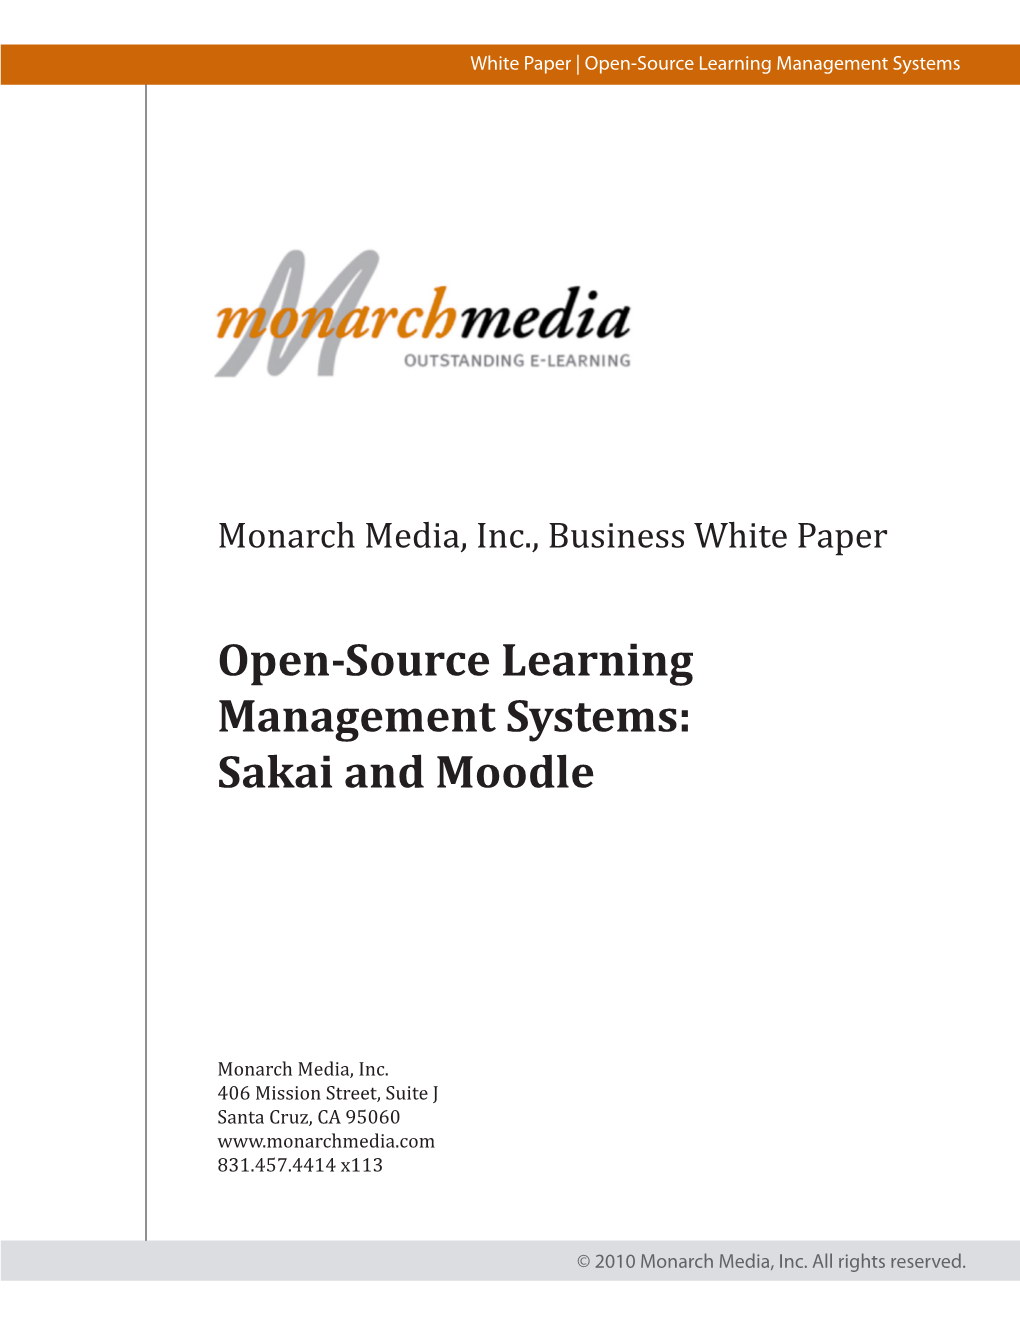 Open-Source Learning Management Systems: Sakai and Moodle